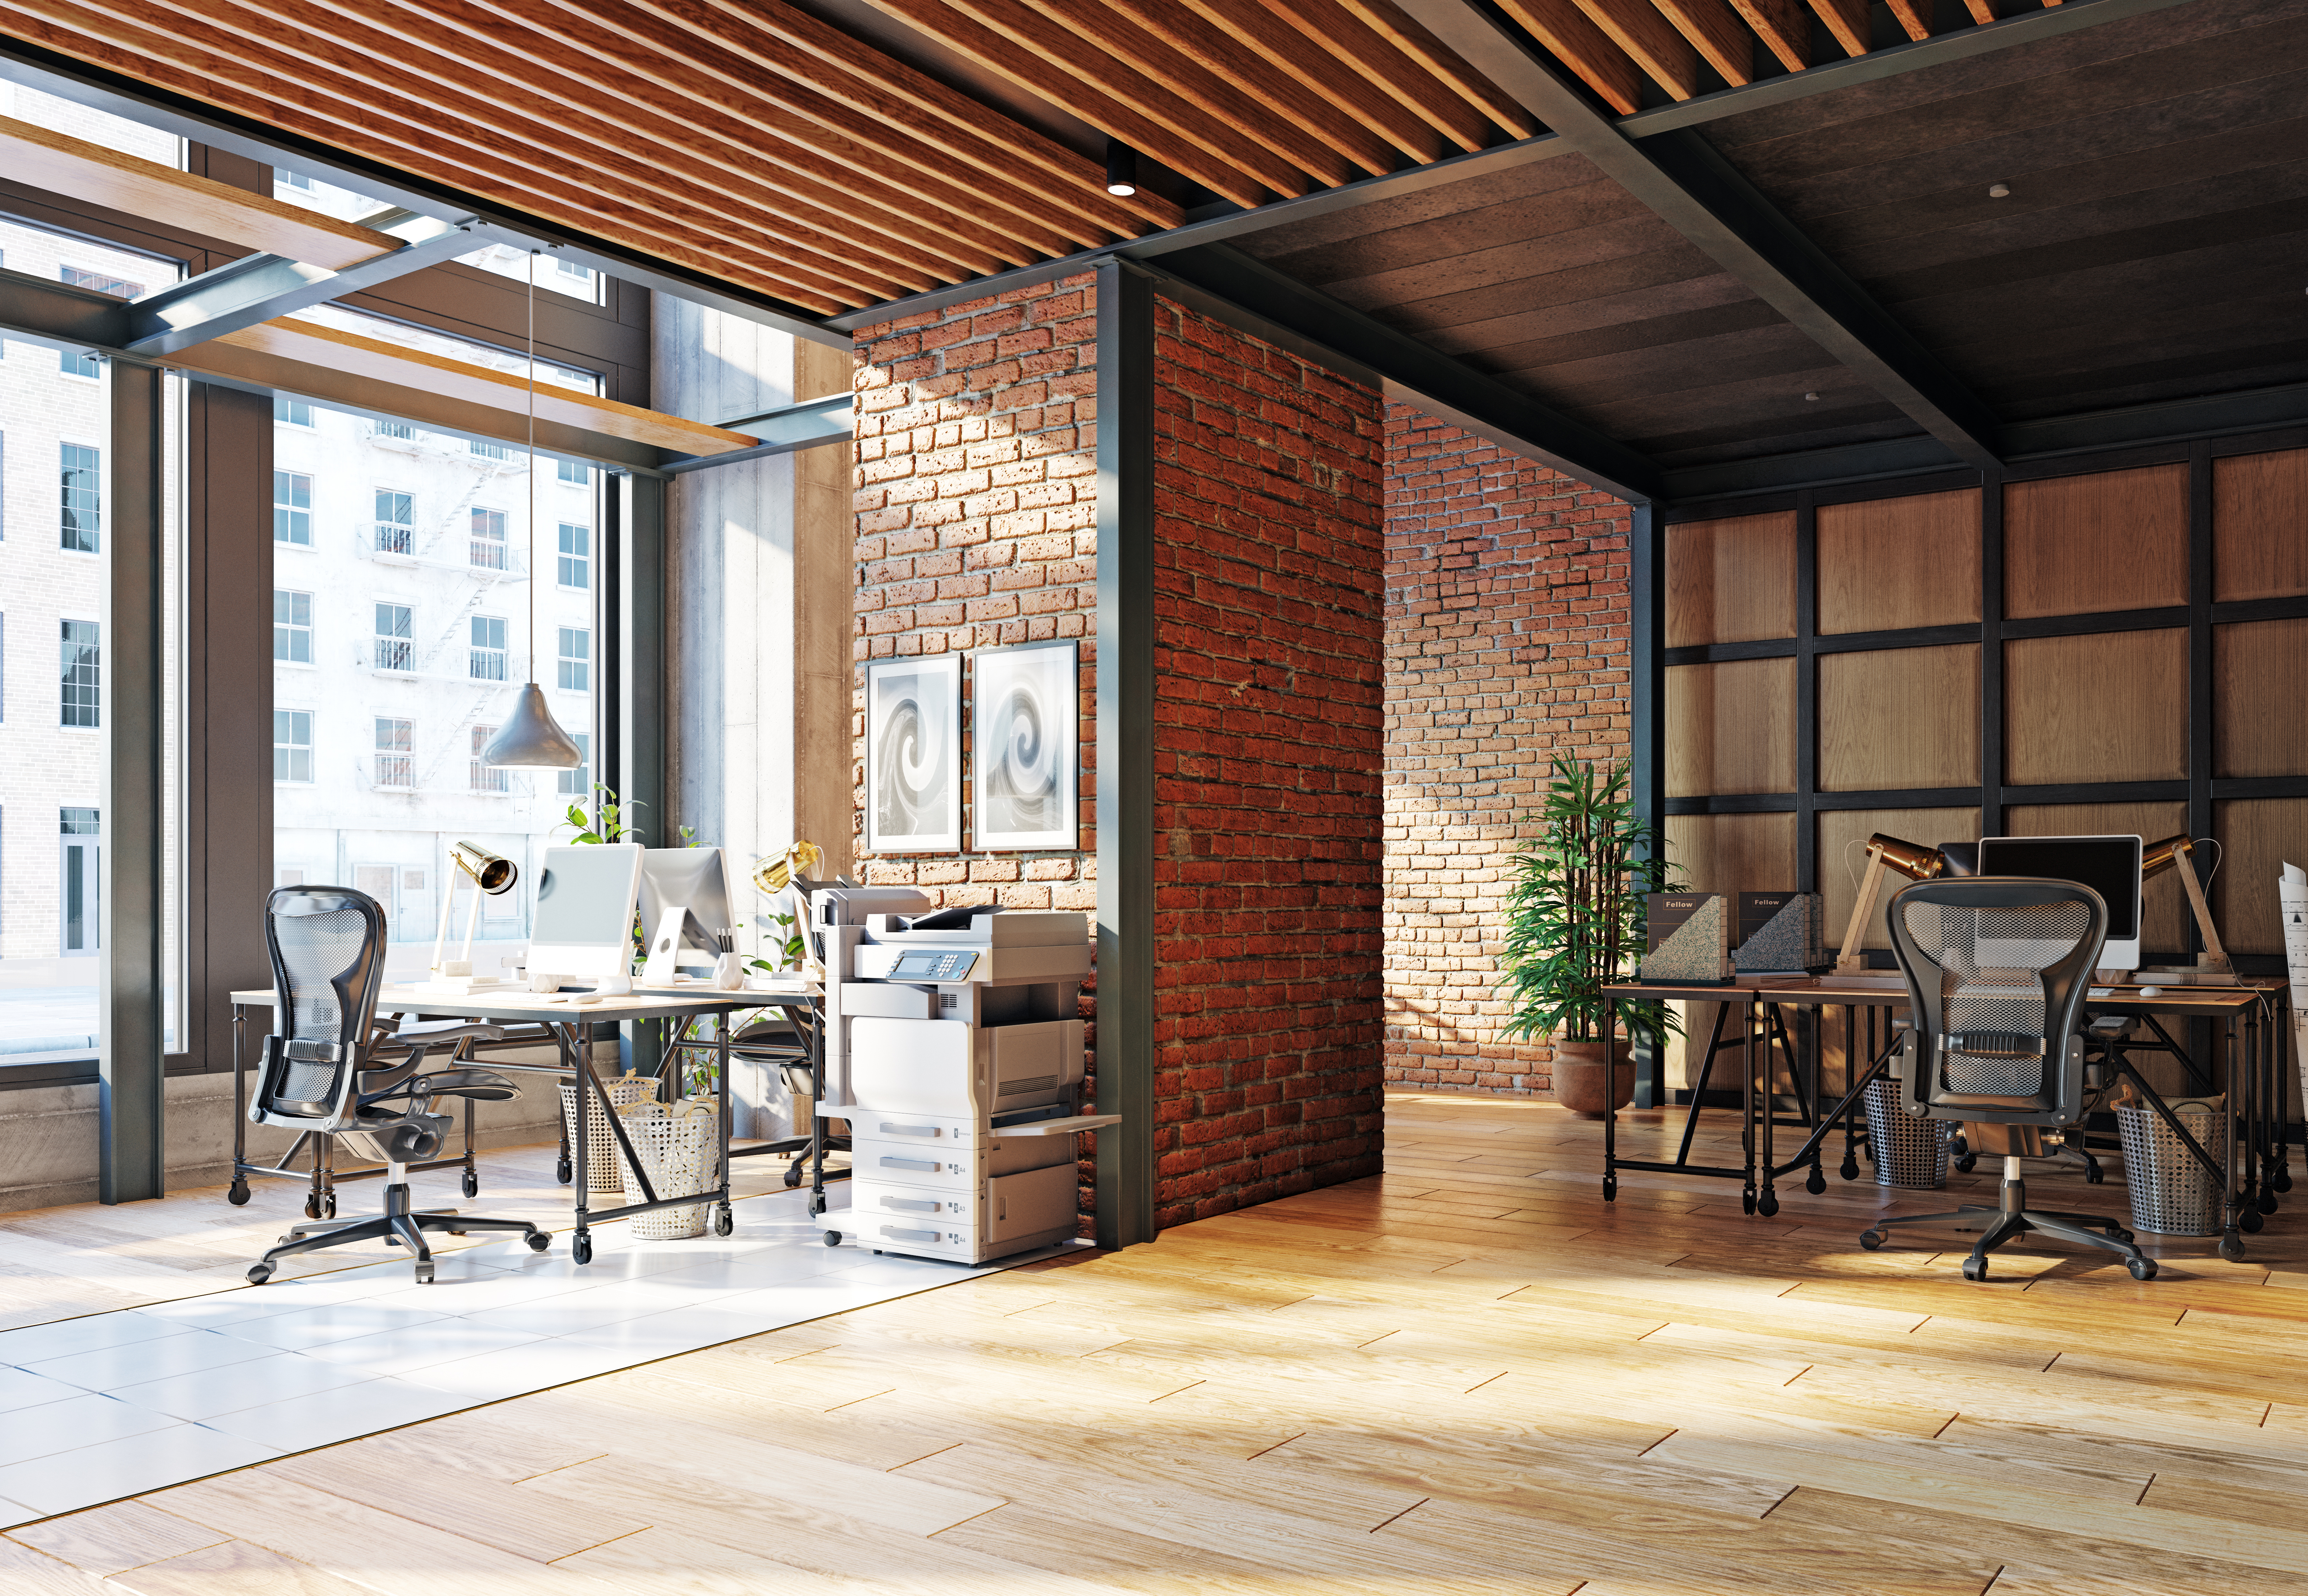 Featured image: A modern office with brick walls and wooden floors. - Read full post: Relocating office premises? Our top tips for a smooth tech move.